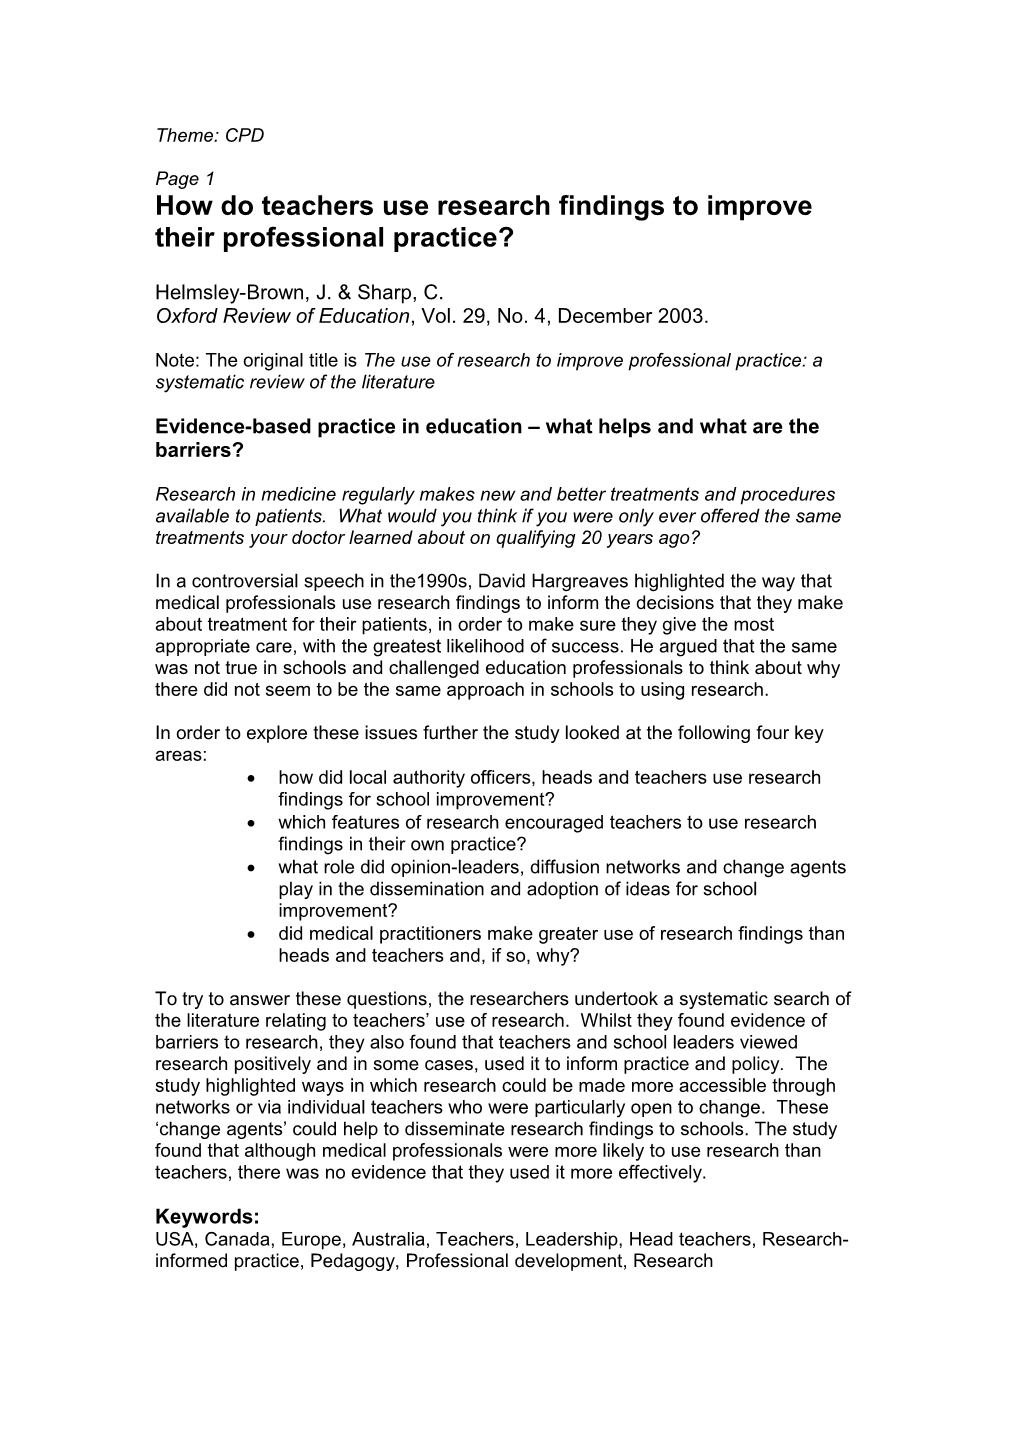 How Do Teachers Use Research to Improve Their Professional Practice